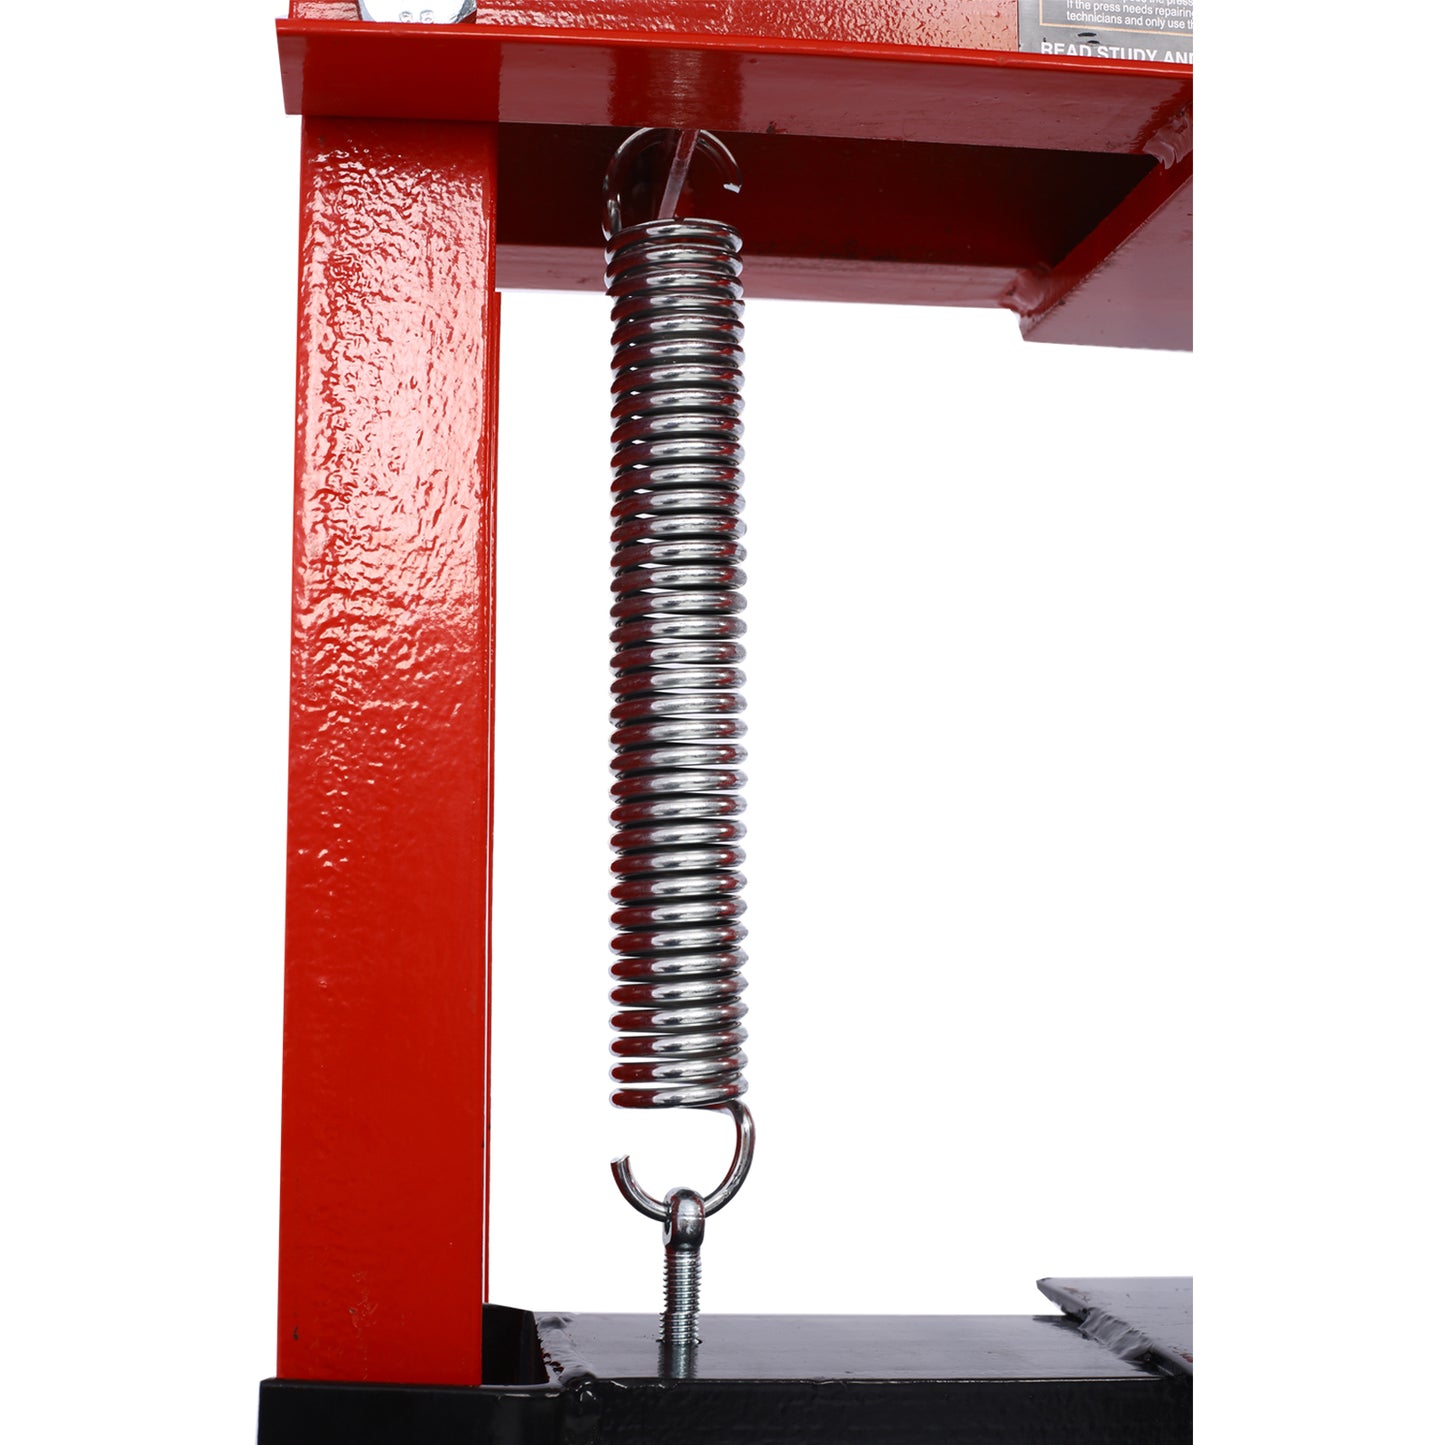 Hydraulic Shop Press ,12-Ton Capacity , Floor Mount ,with Press Plates, H-Frame Garage Floor Press, Adjustable Working Table Height,red